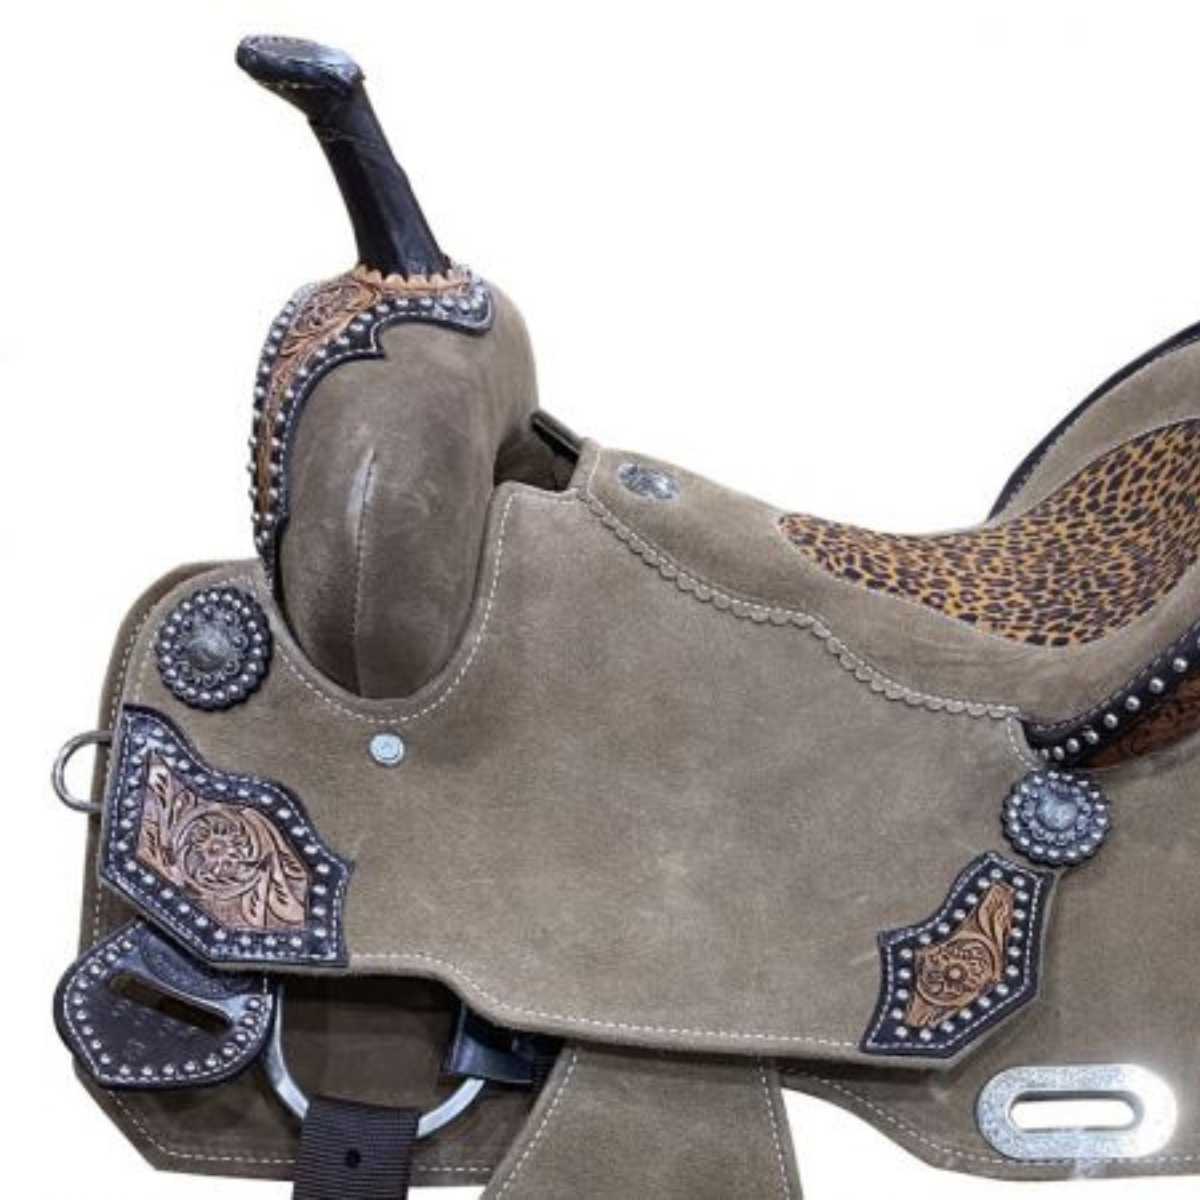 14", 15" DOUBLE T ROUGH OUT BARREL STYLE SADDLE WITH CHEETAH PRINTED INLAY - Double T Saddles